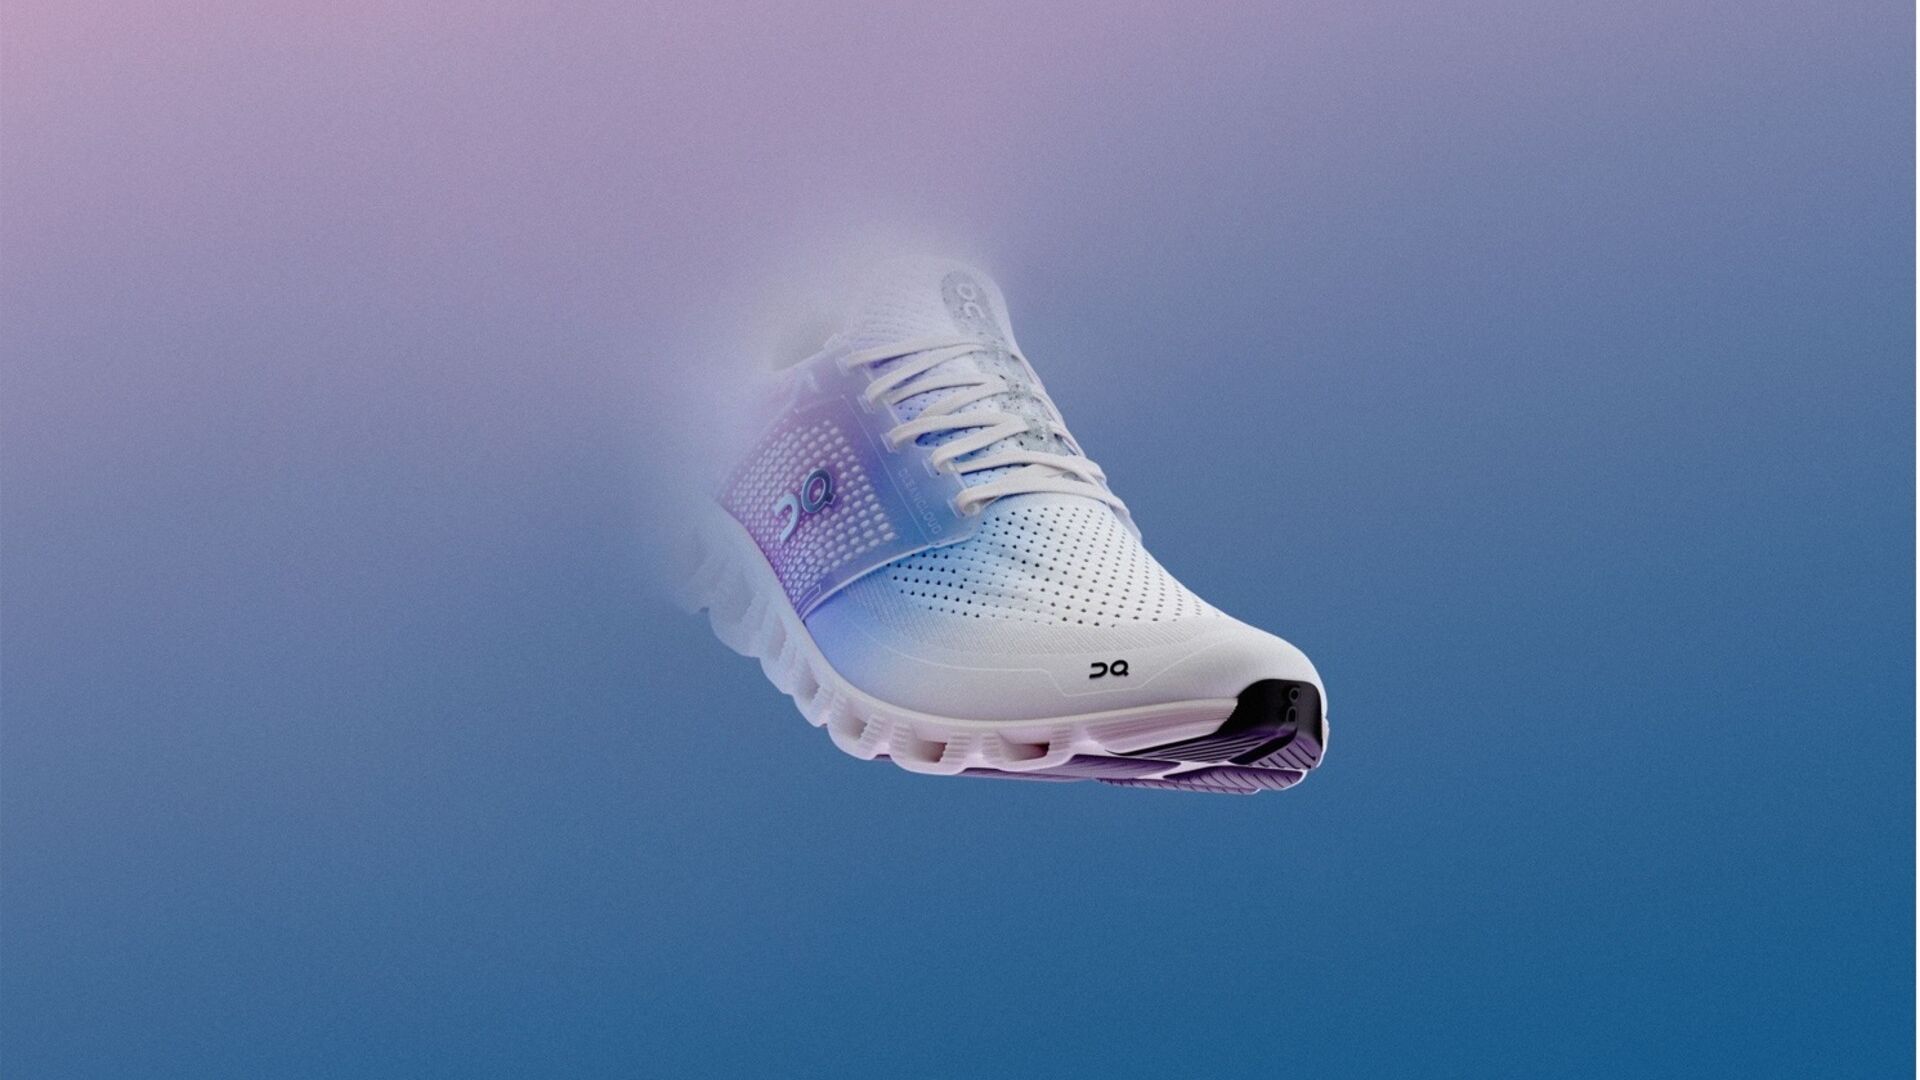 The On Cloudprime carbon shoe is made in Switzerland